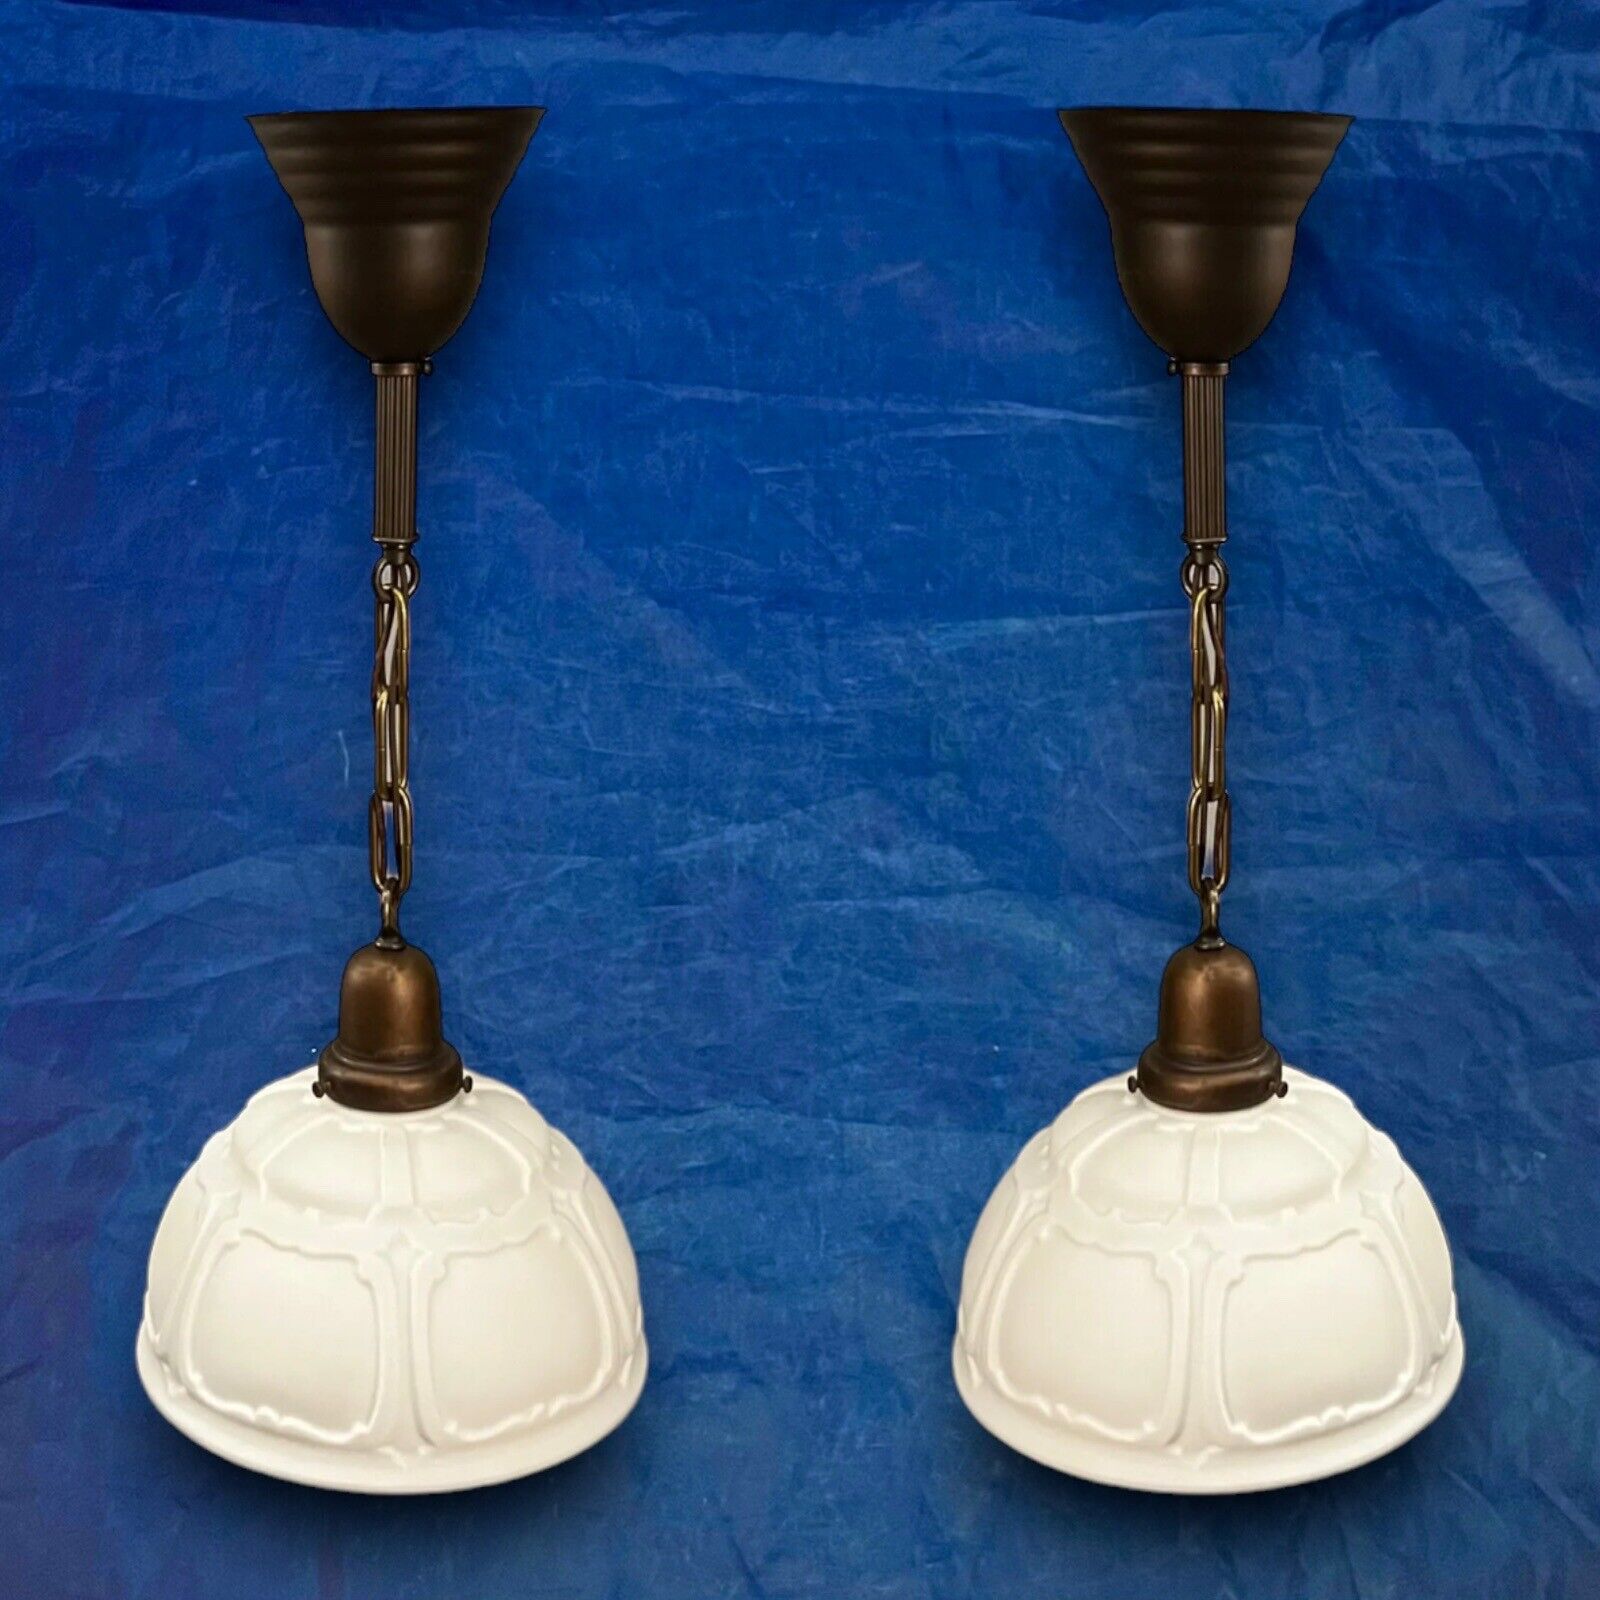 Wired Pair Pendant Light Fixtures W/ Rare Big Shades 20i